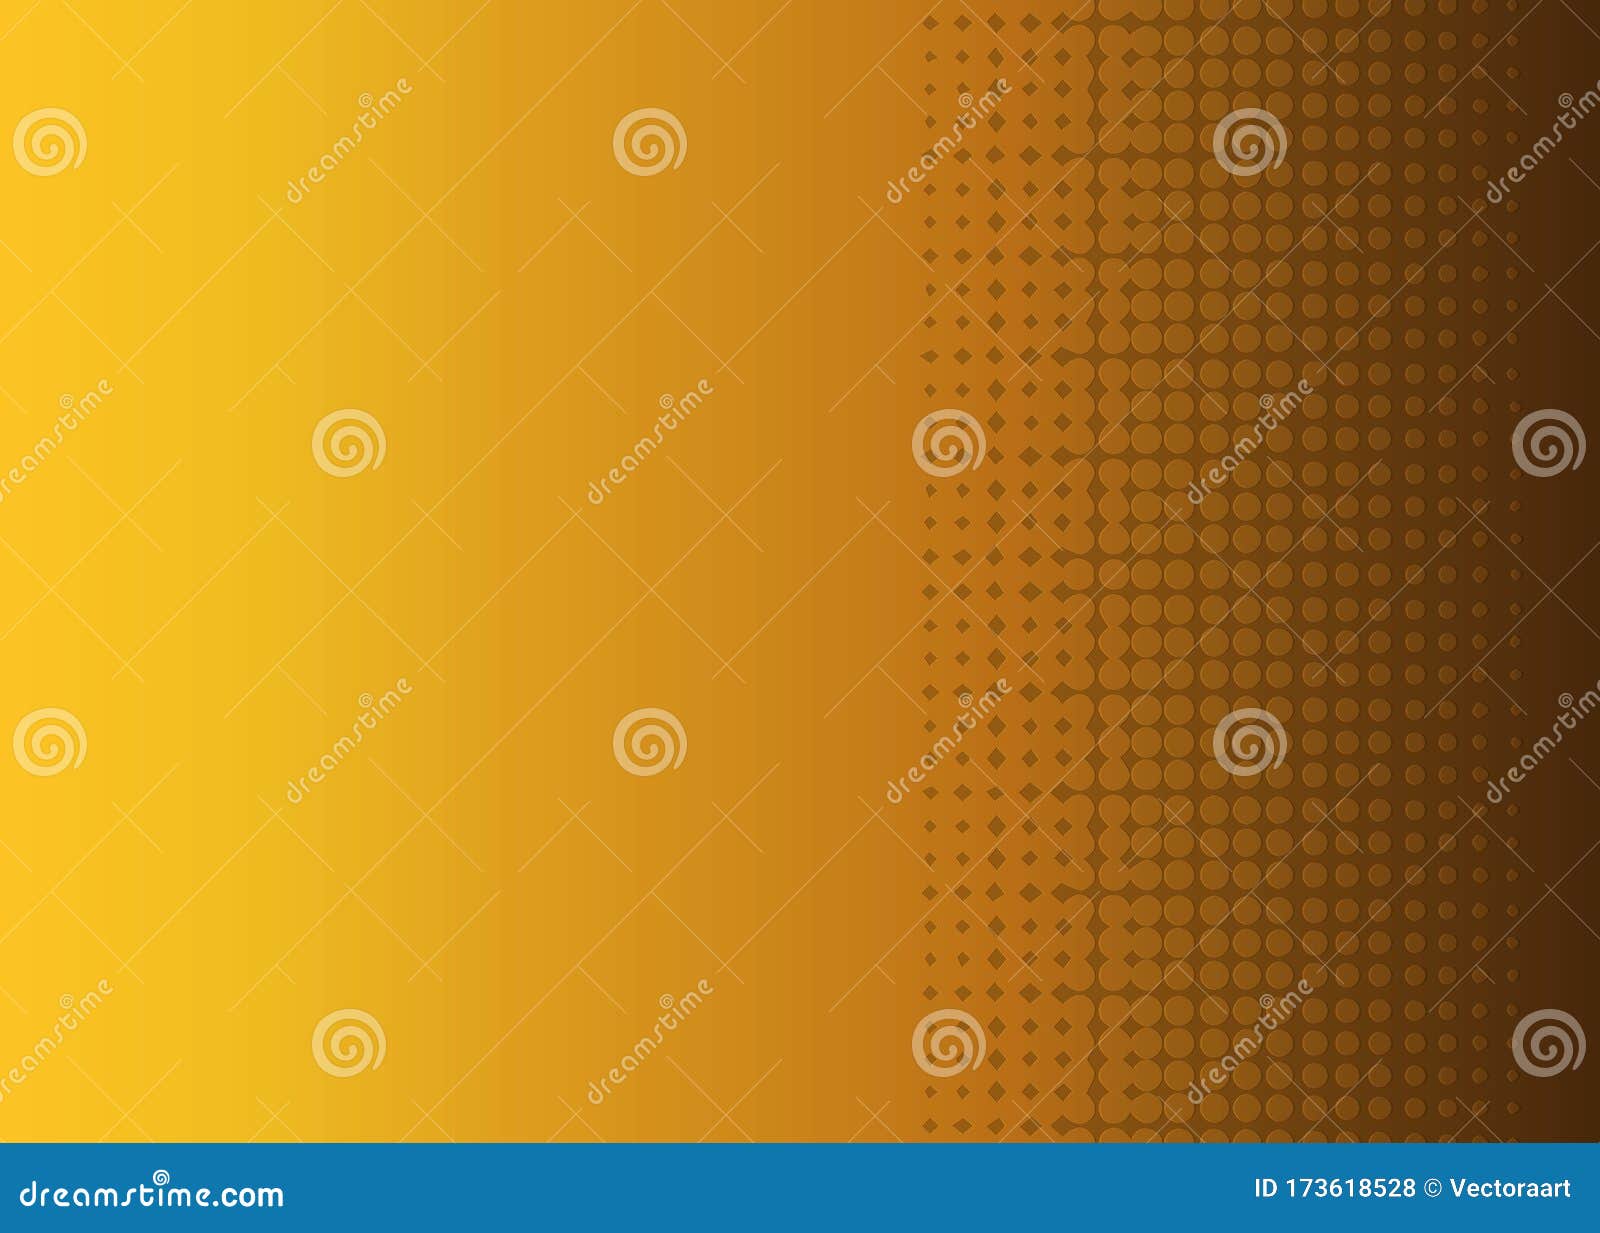 Golden Shade Dot Halftone Background Stock Vector - Illustration of  abstract, color: 173618528